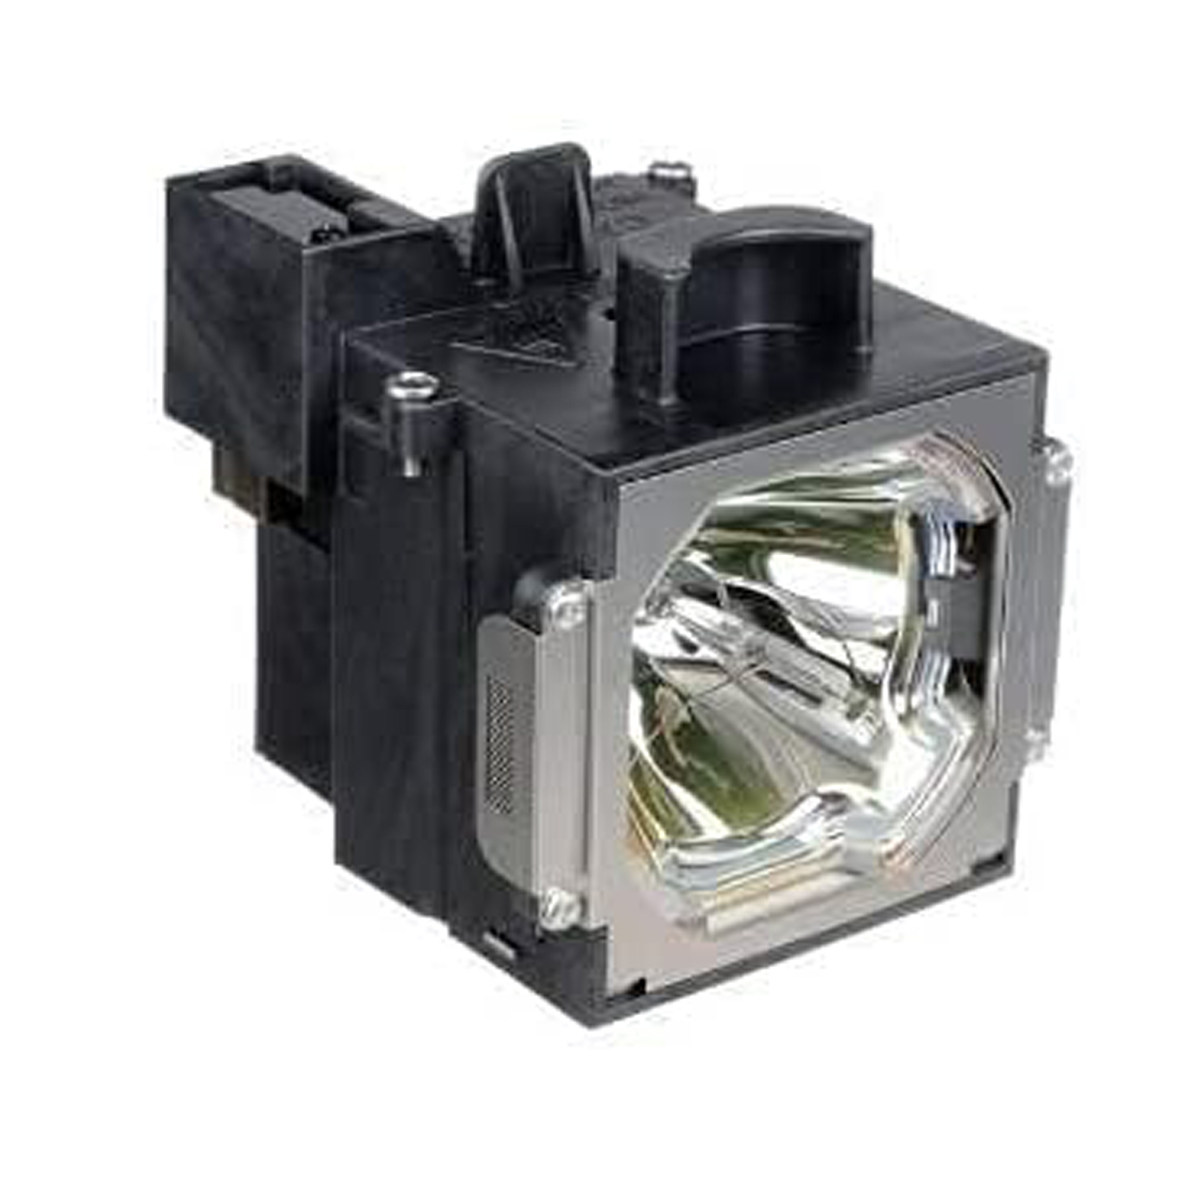 Replacement Projector lamp POA-LMP128 For Sanyo PLC-XF1000 PLC-XF71